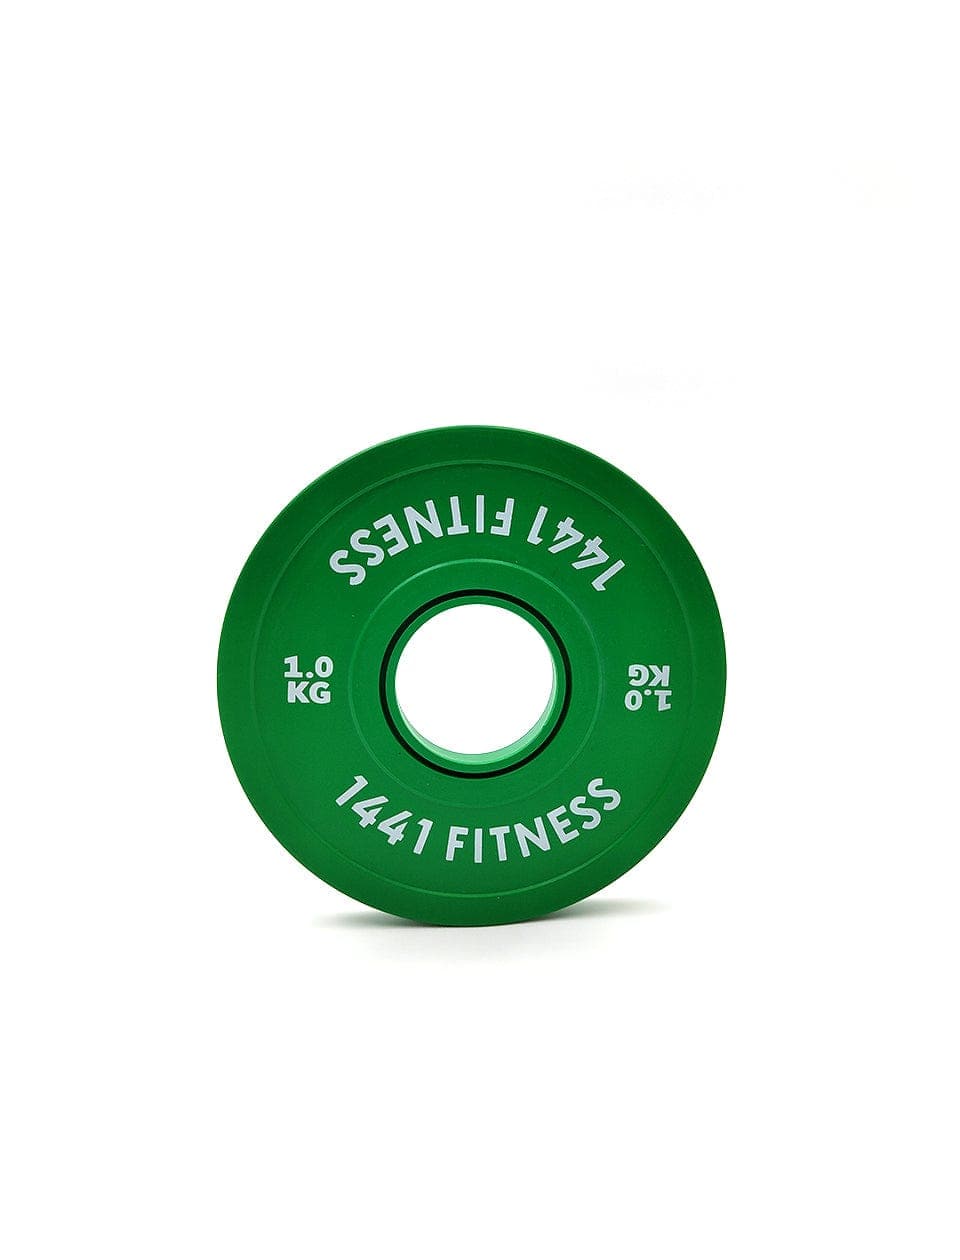 PRSAE Plates & Bars 1 KG 1441 Fitness Fractional Bumper Weight Plates 0.5 kg to 2.5 Kg - Sold as Per Piece